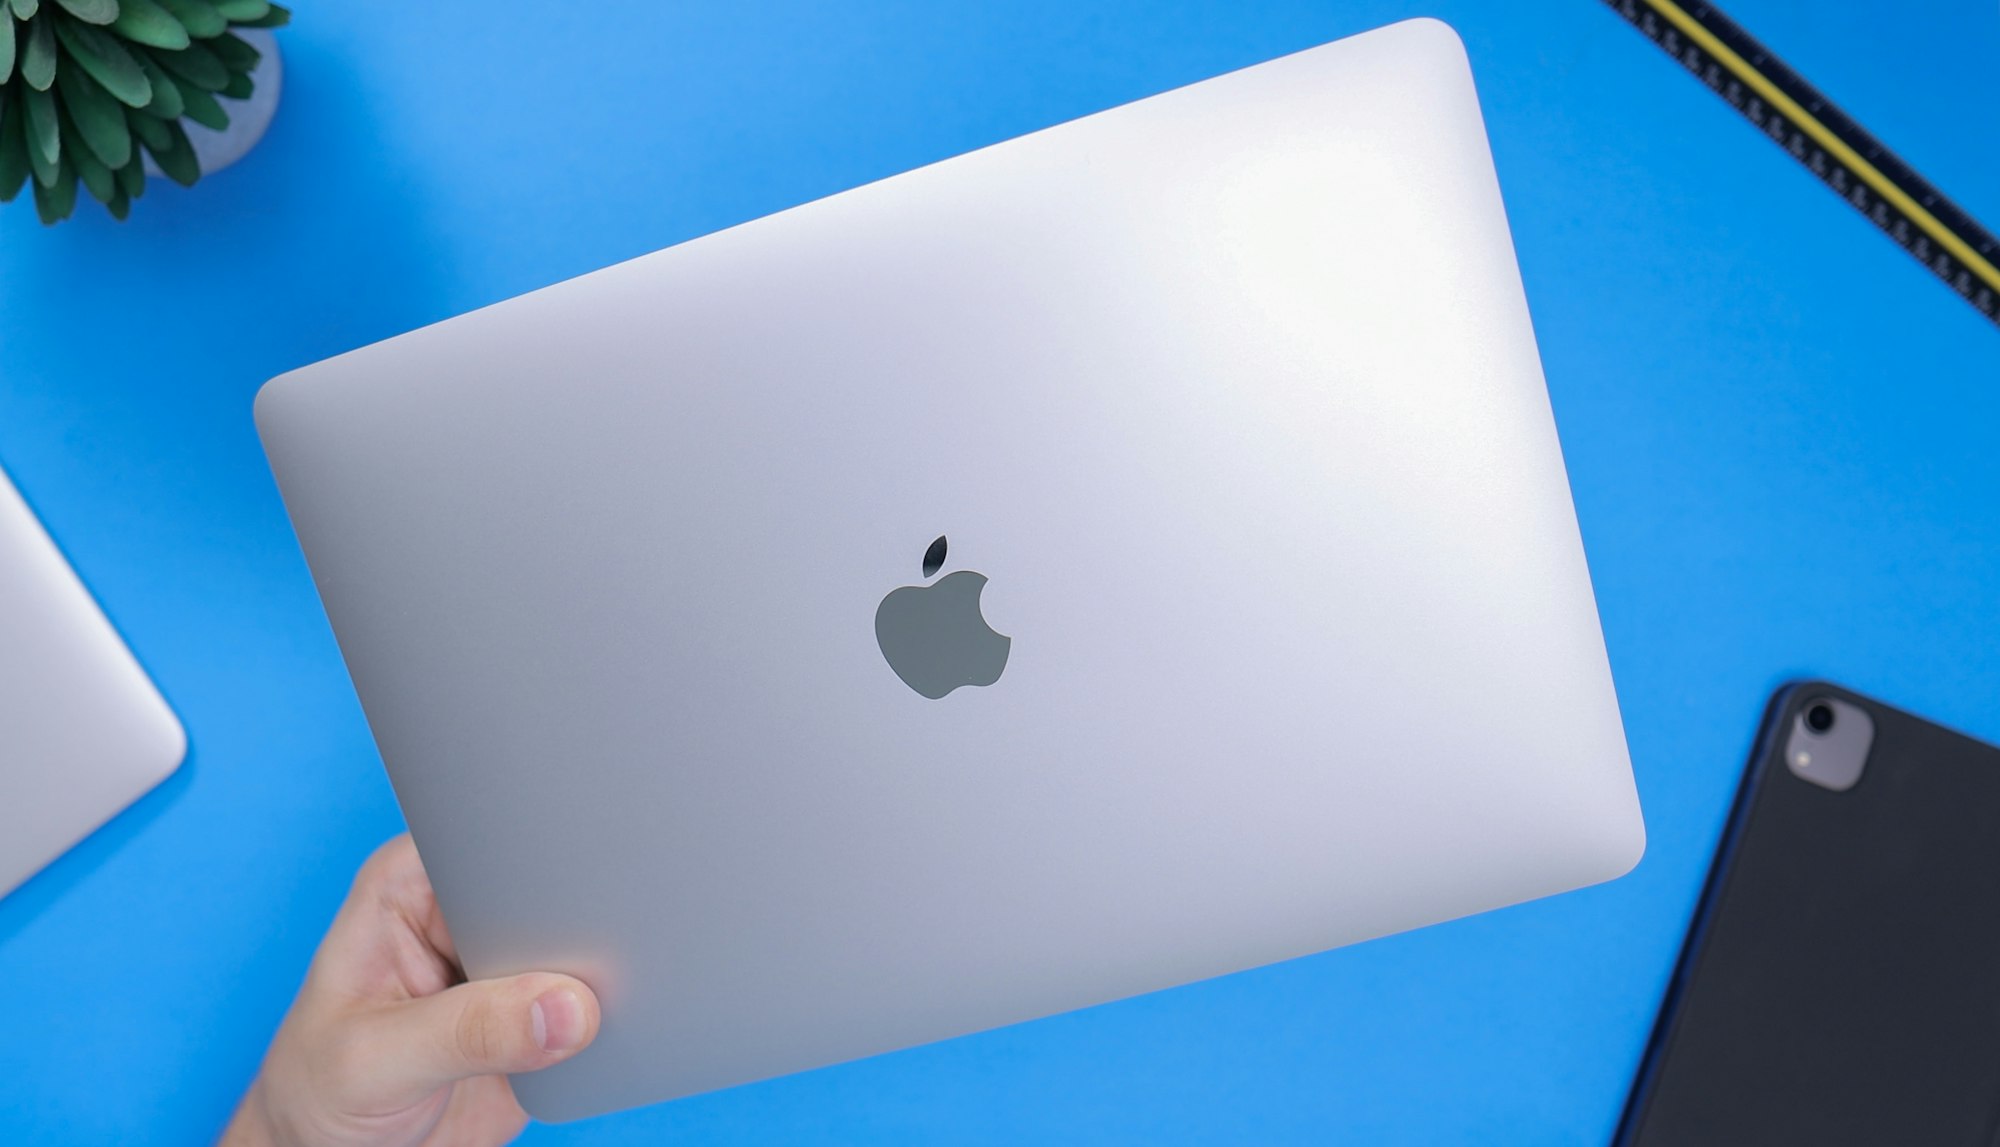 What should you, as a developer, install once you get a MacBook?